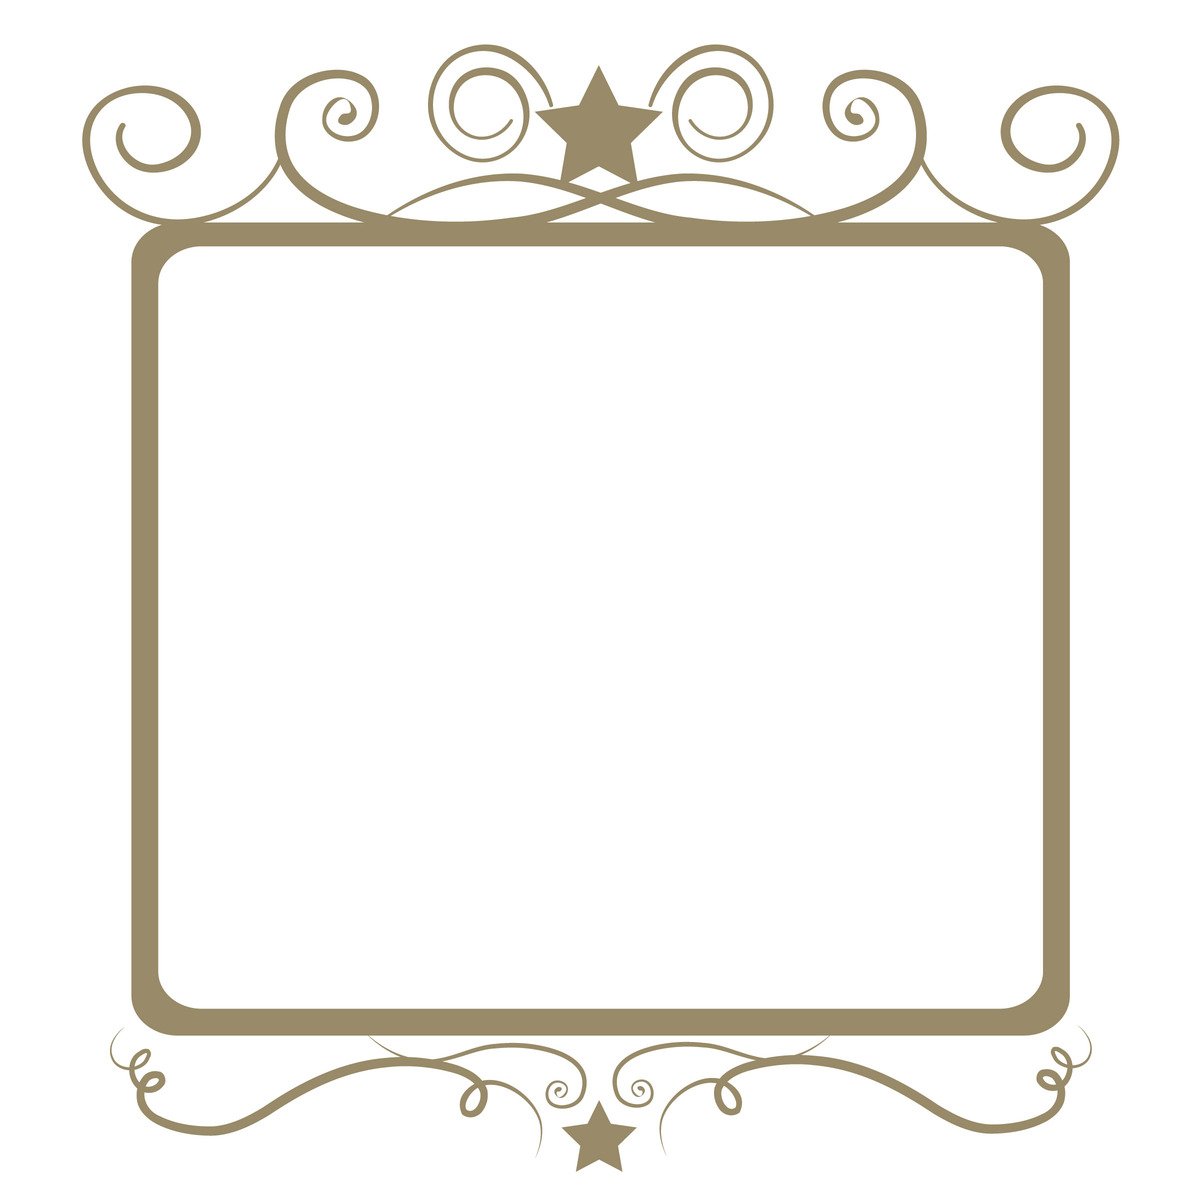 an ornate gold frame with stars